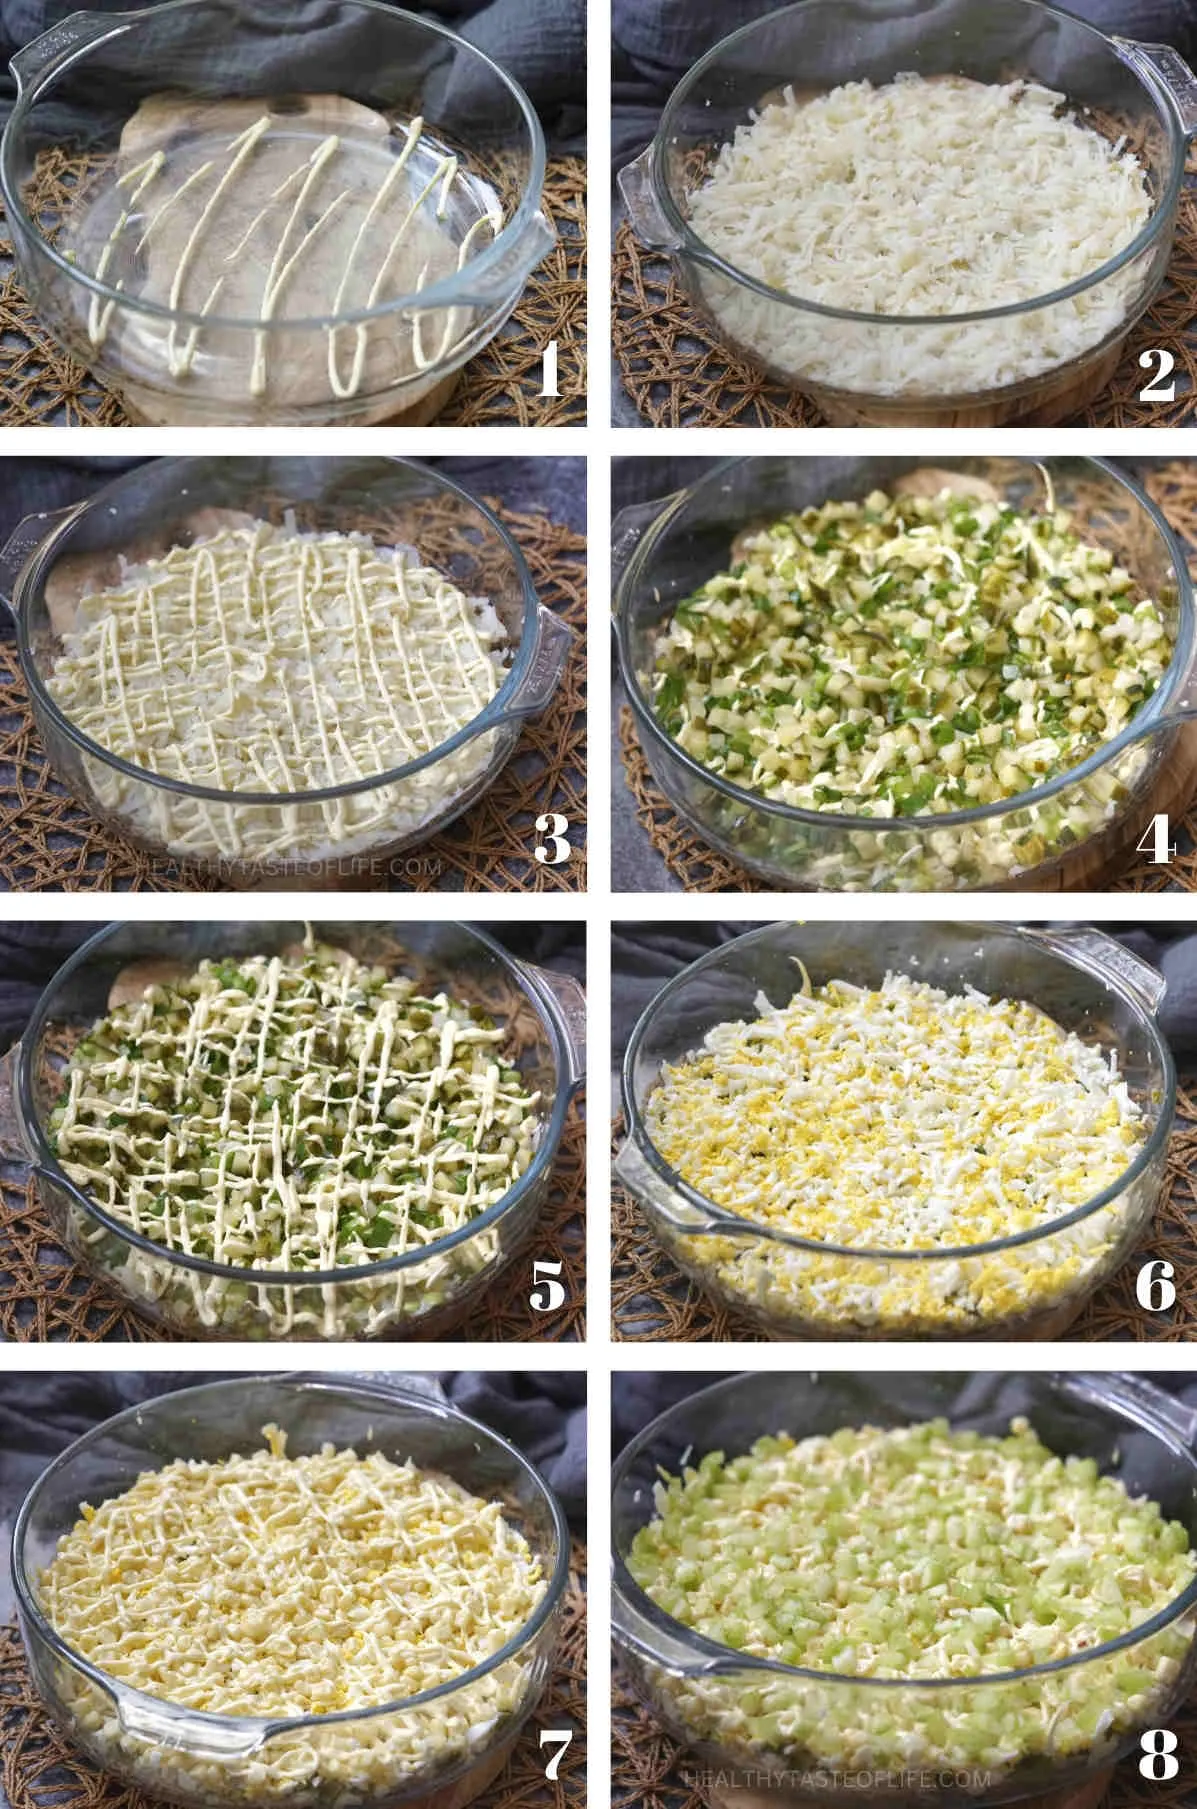 Process shots showing how to make this potato and egg salad recipe step by step, how to assemble and layer up.